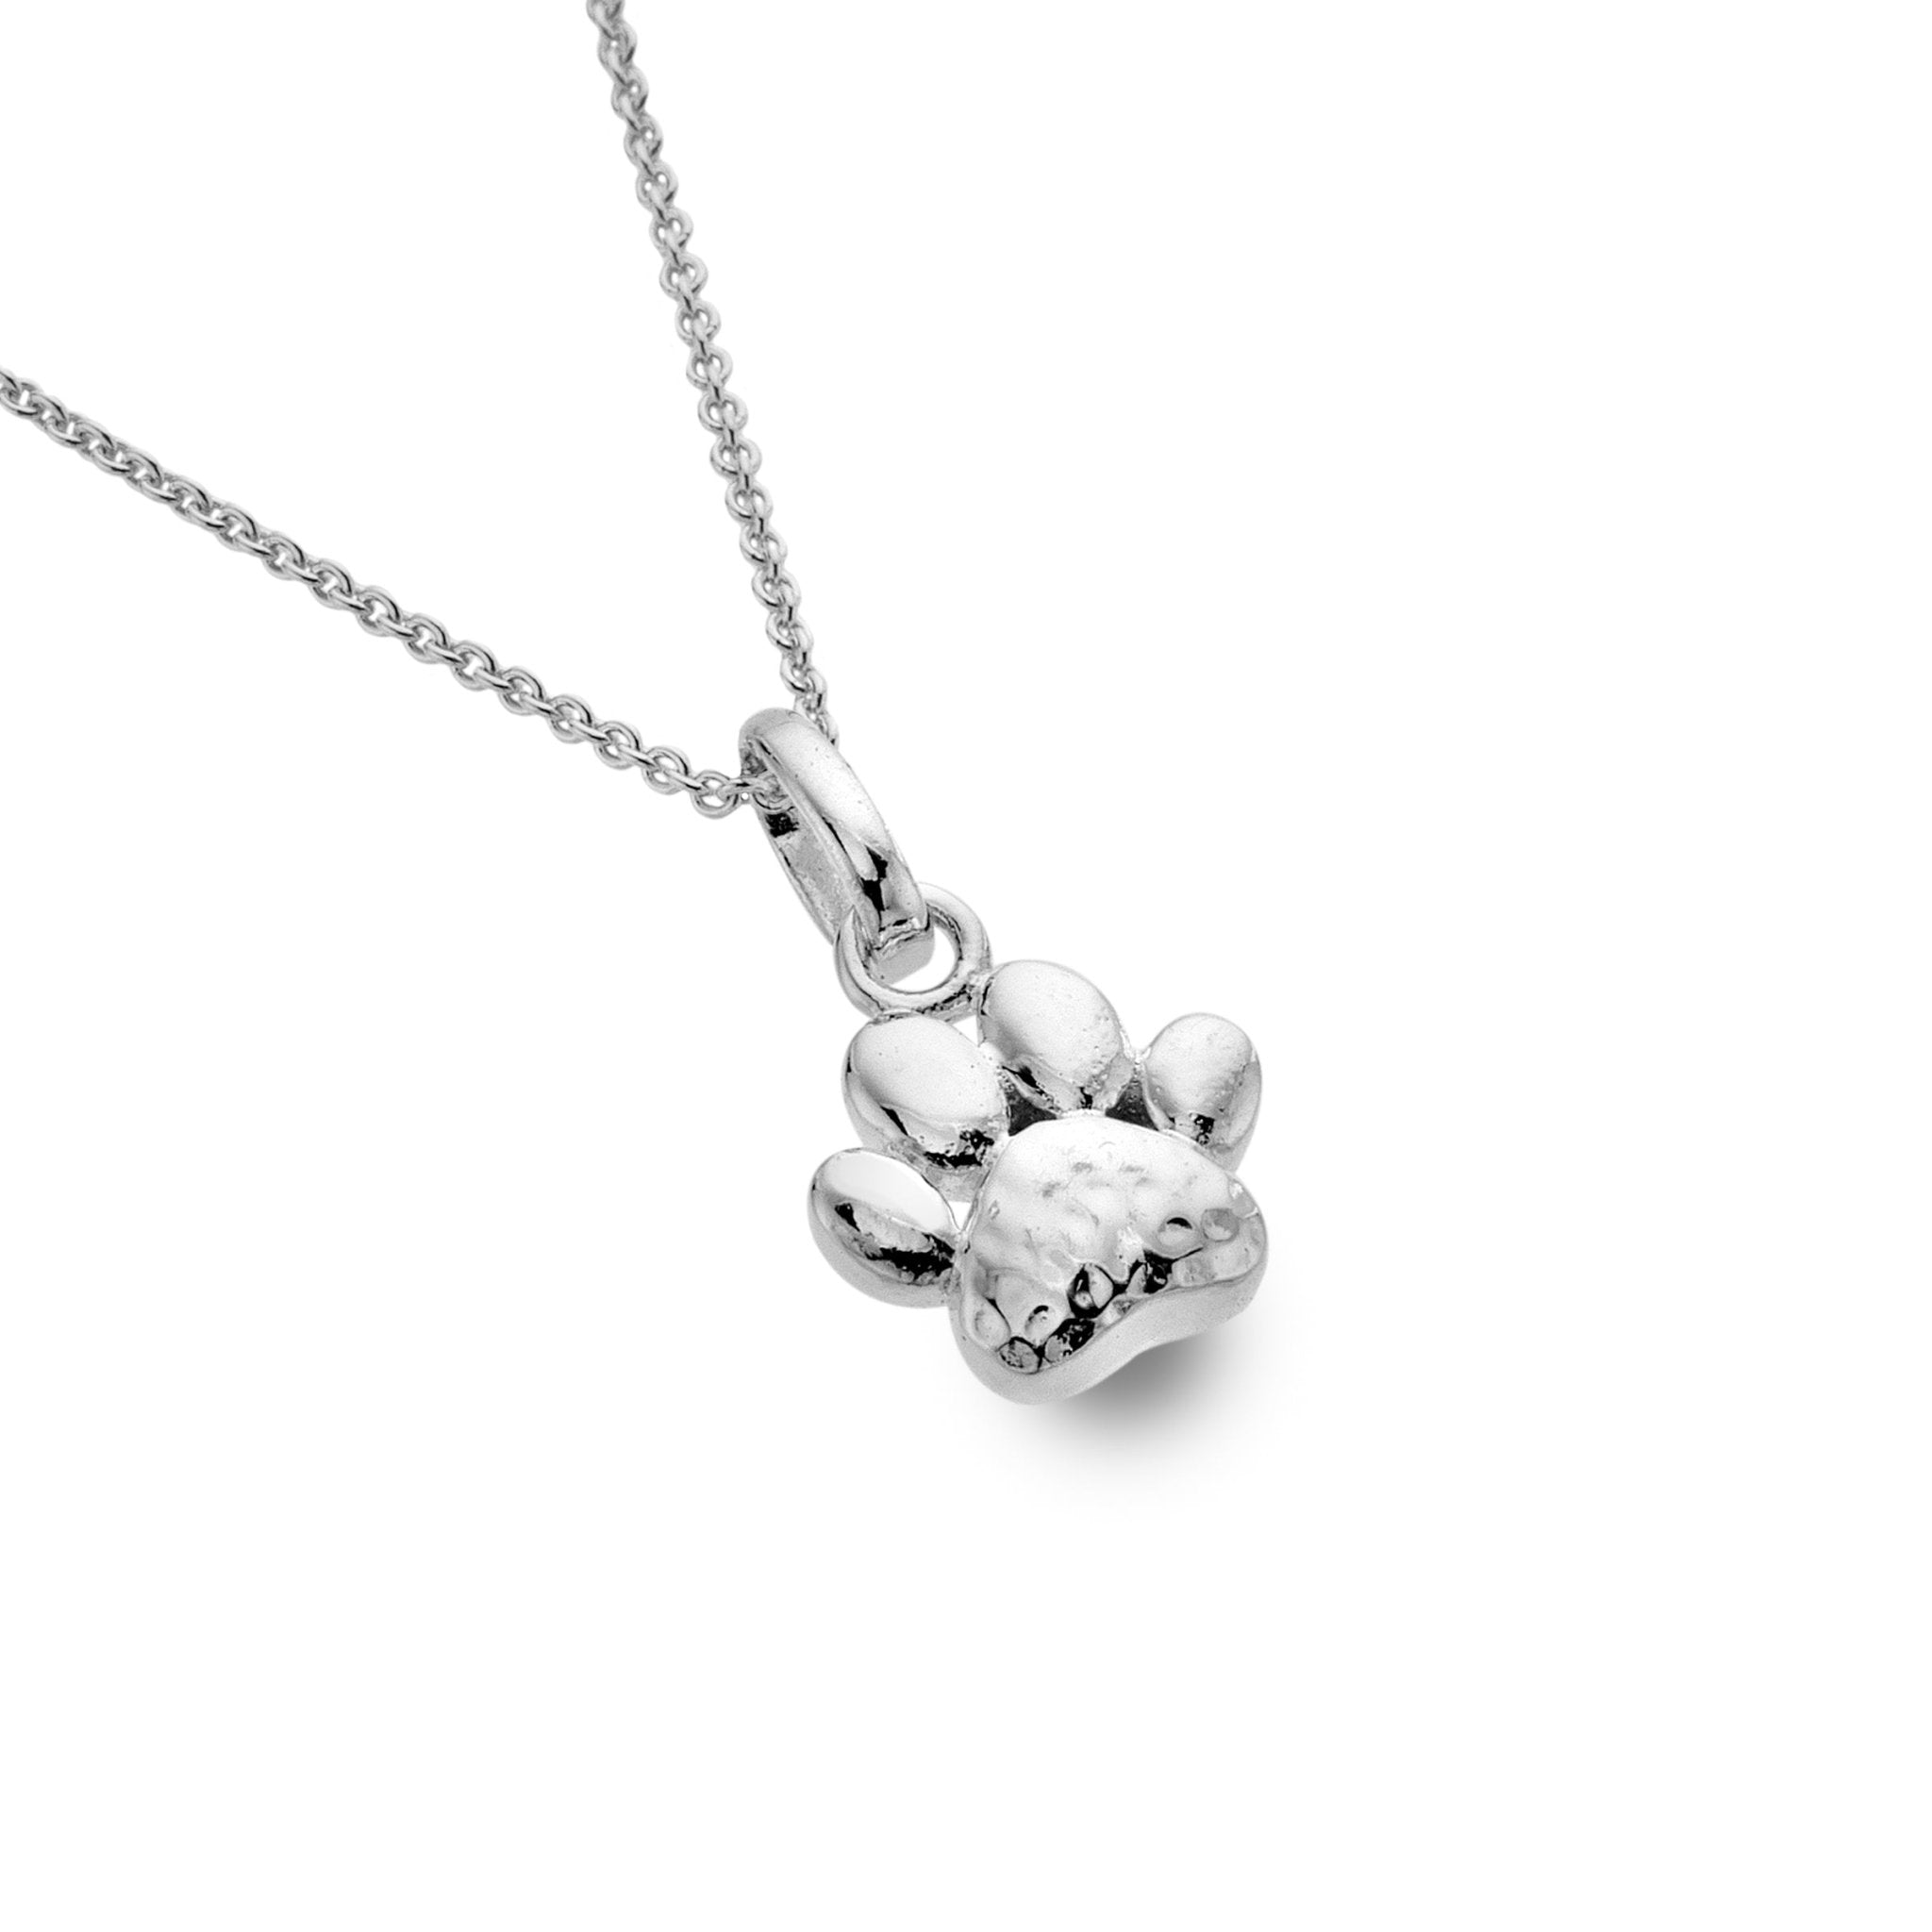 925 Sterling Silver Cut- Out Paw Print Pendant Necklace | eBay